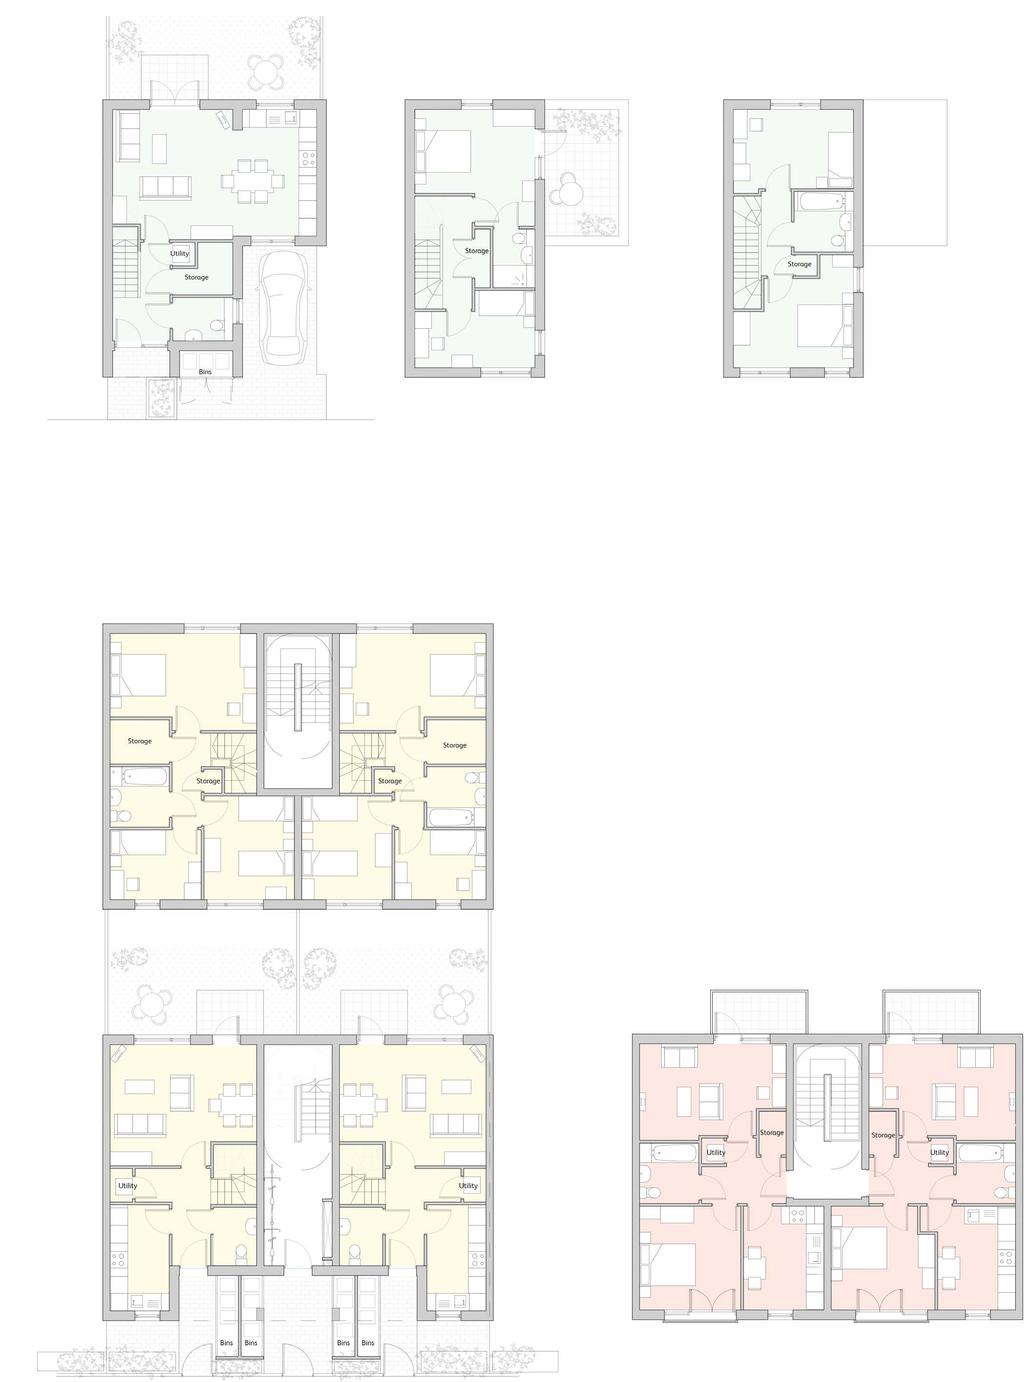 distribution of house types Private 3 bed, 5 person house